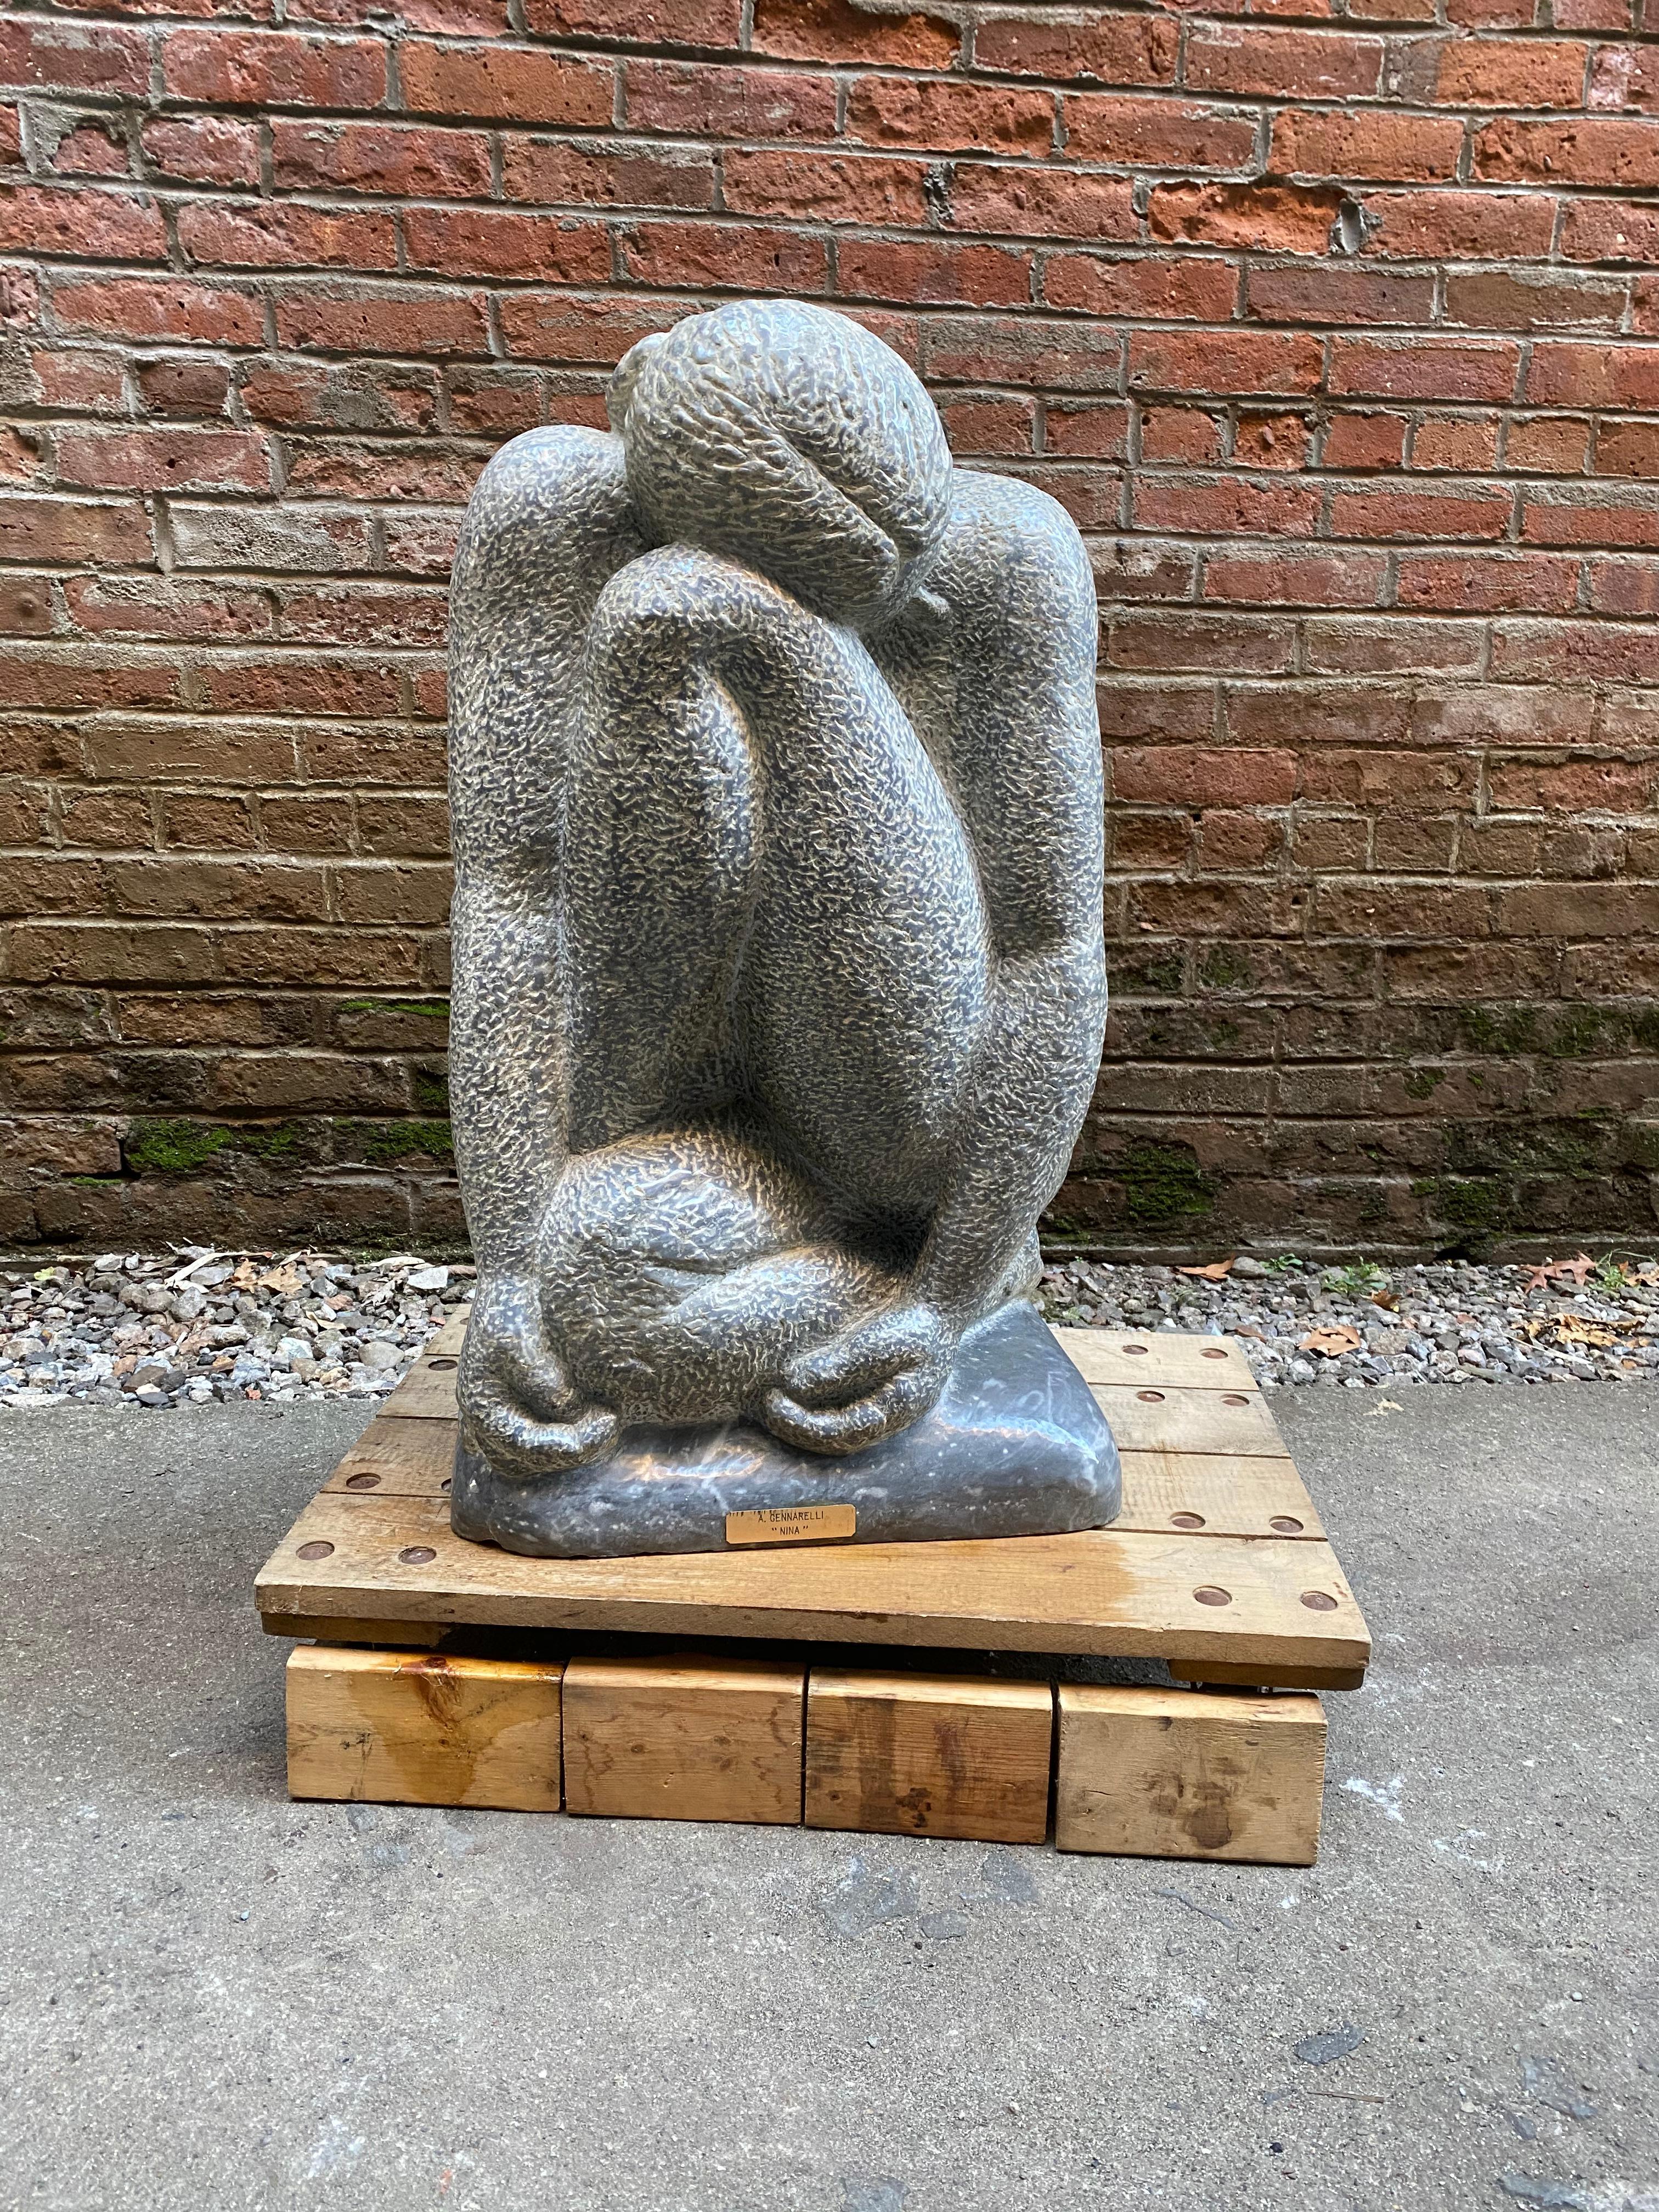 Nina by Anthony Gennarelli, circa 1980-1985. Gennarelli's homage to the nude bathers of earlier times. Sculpted in Bardiglio gray marble. Very good condition with no visible issues. Minor cosmetic wear and blemishes. A very heavy and sizable piece